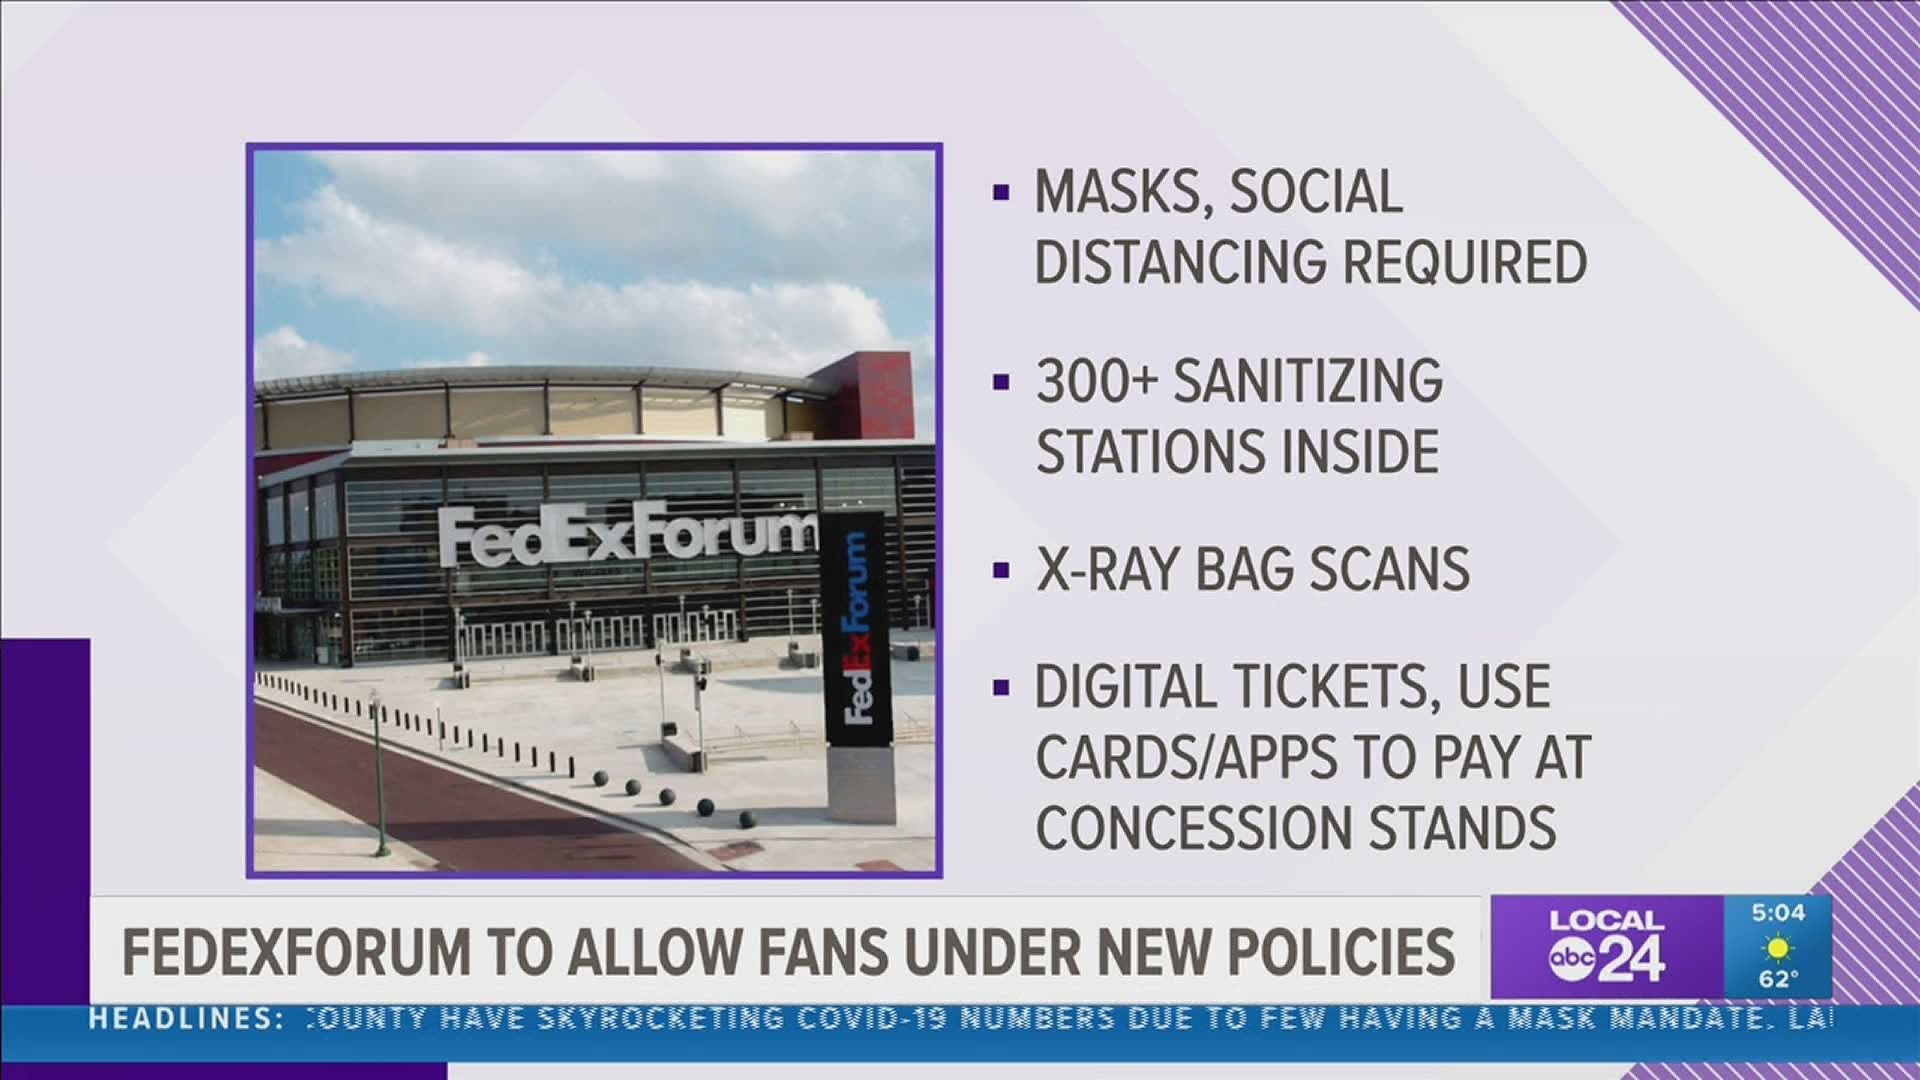 Spurs will continue limiting capacity, requiring masks at games